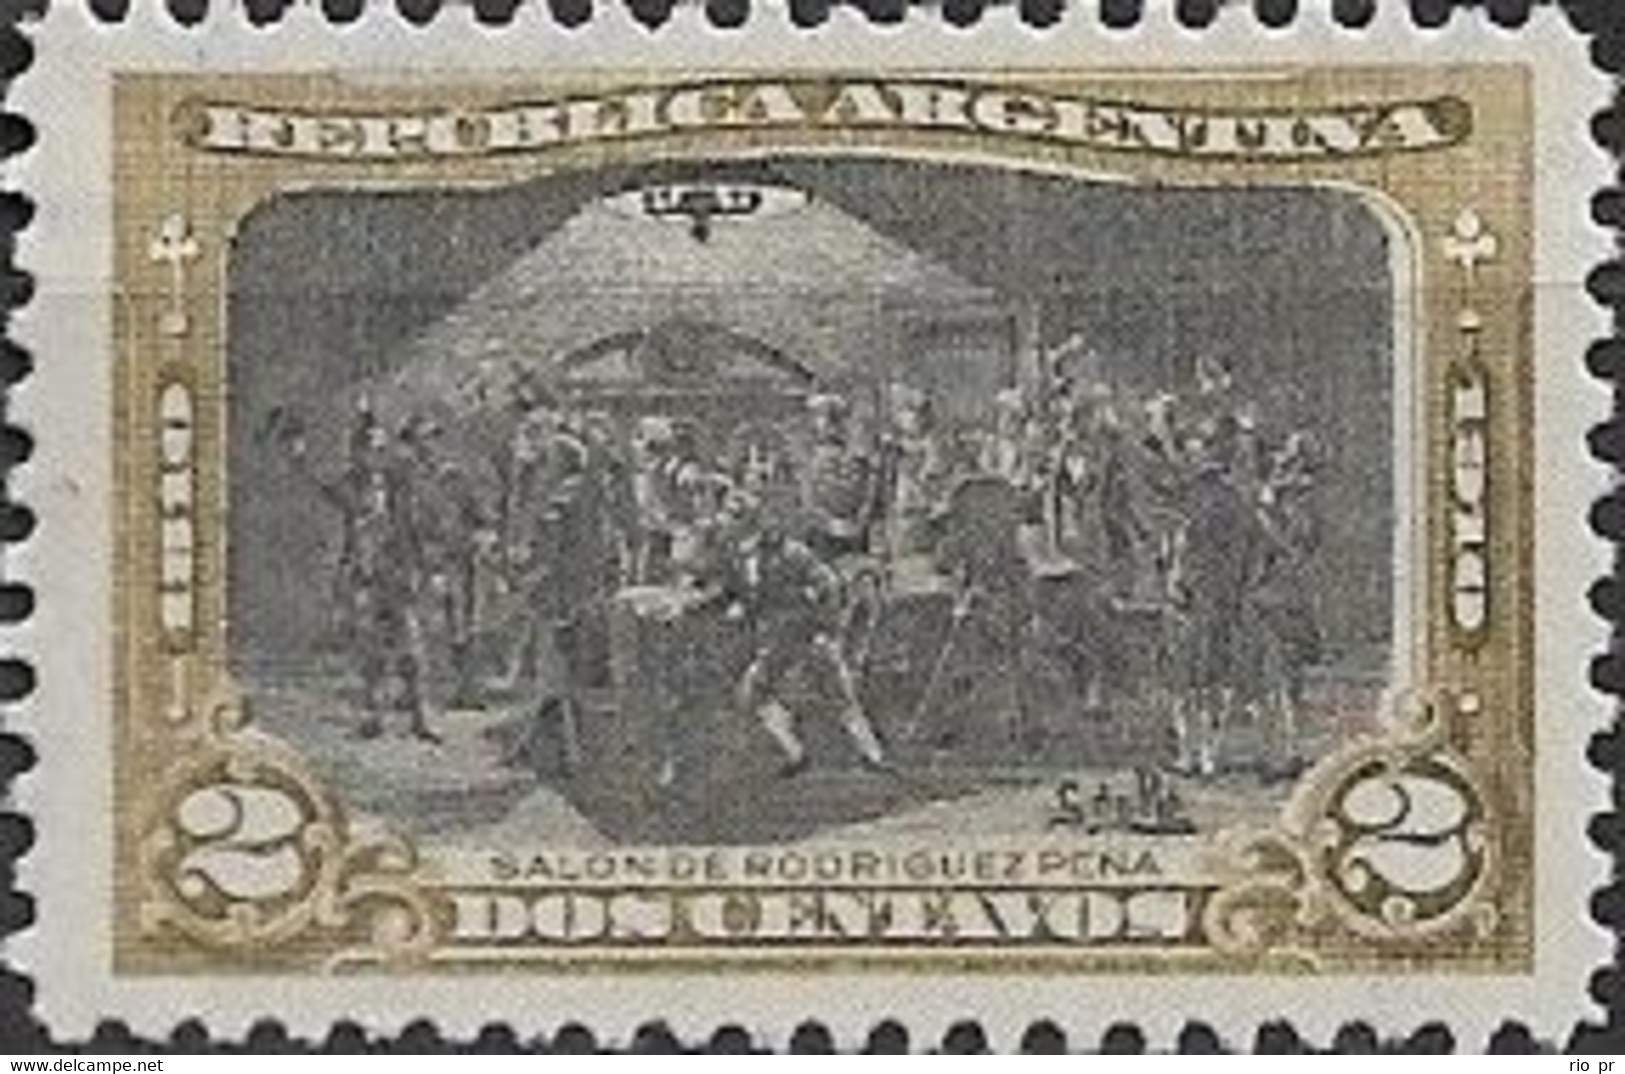 ARGENTINA - CENTENARY OF THE ARGENTINE REPUBLIC (MEETING AT PEÑA'S HOME, 2 C) 1910 - MNH - Ungebraucht